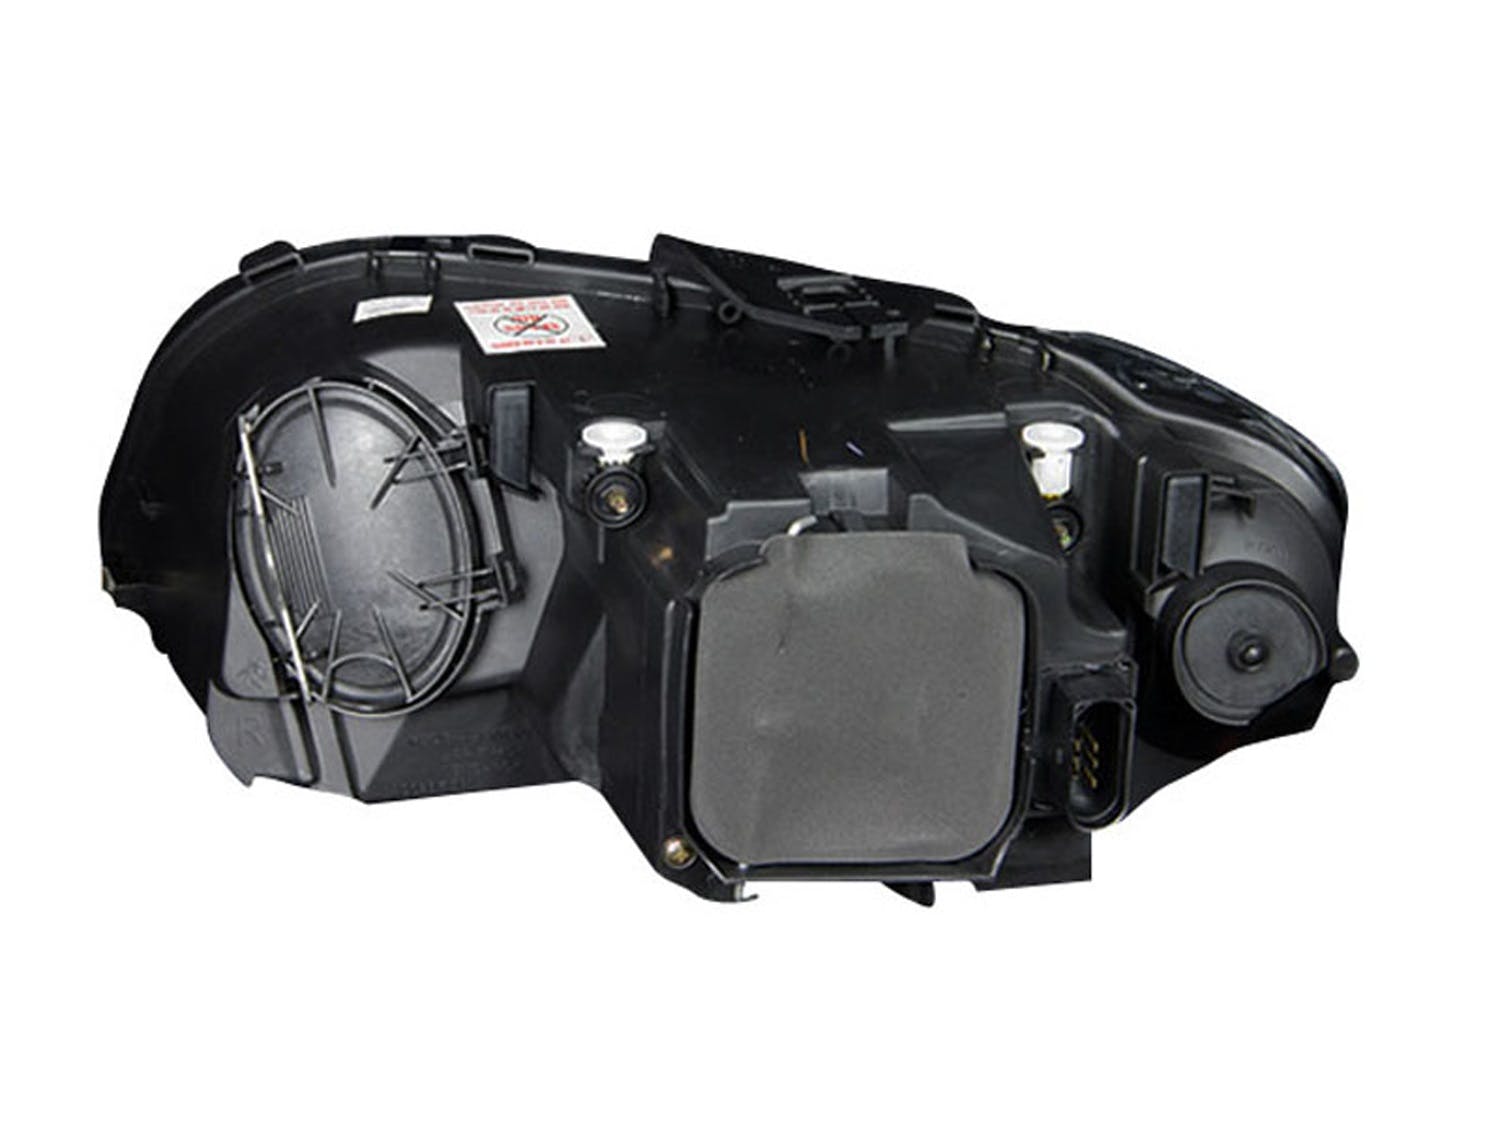 AnzoUSA 121322 Projector Headlights Black (R8 LED Style)